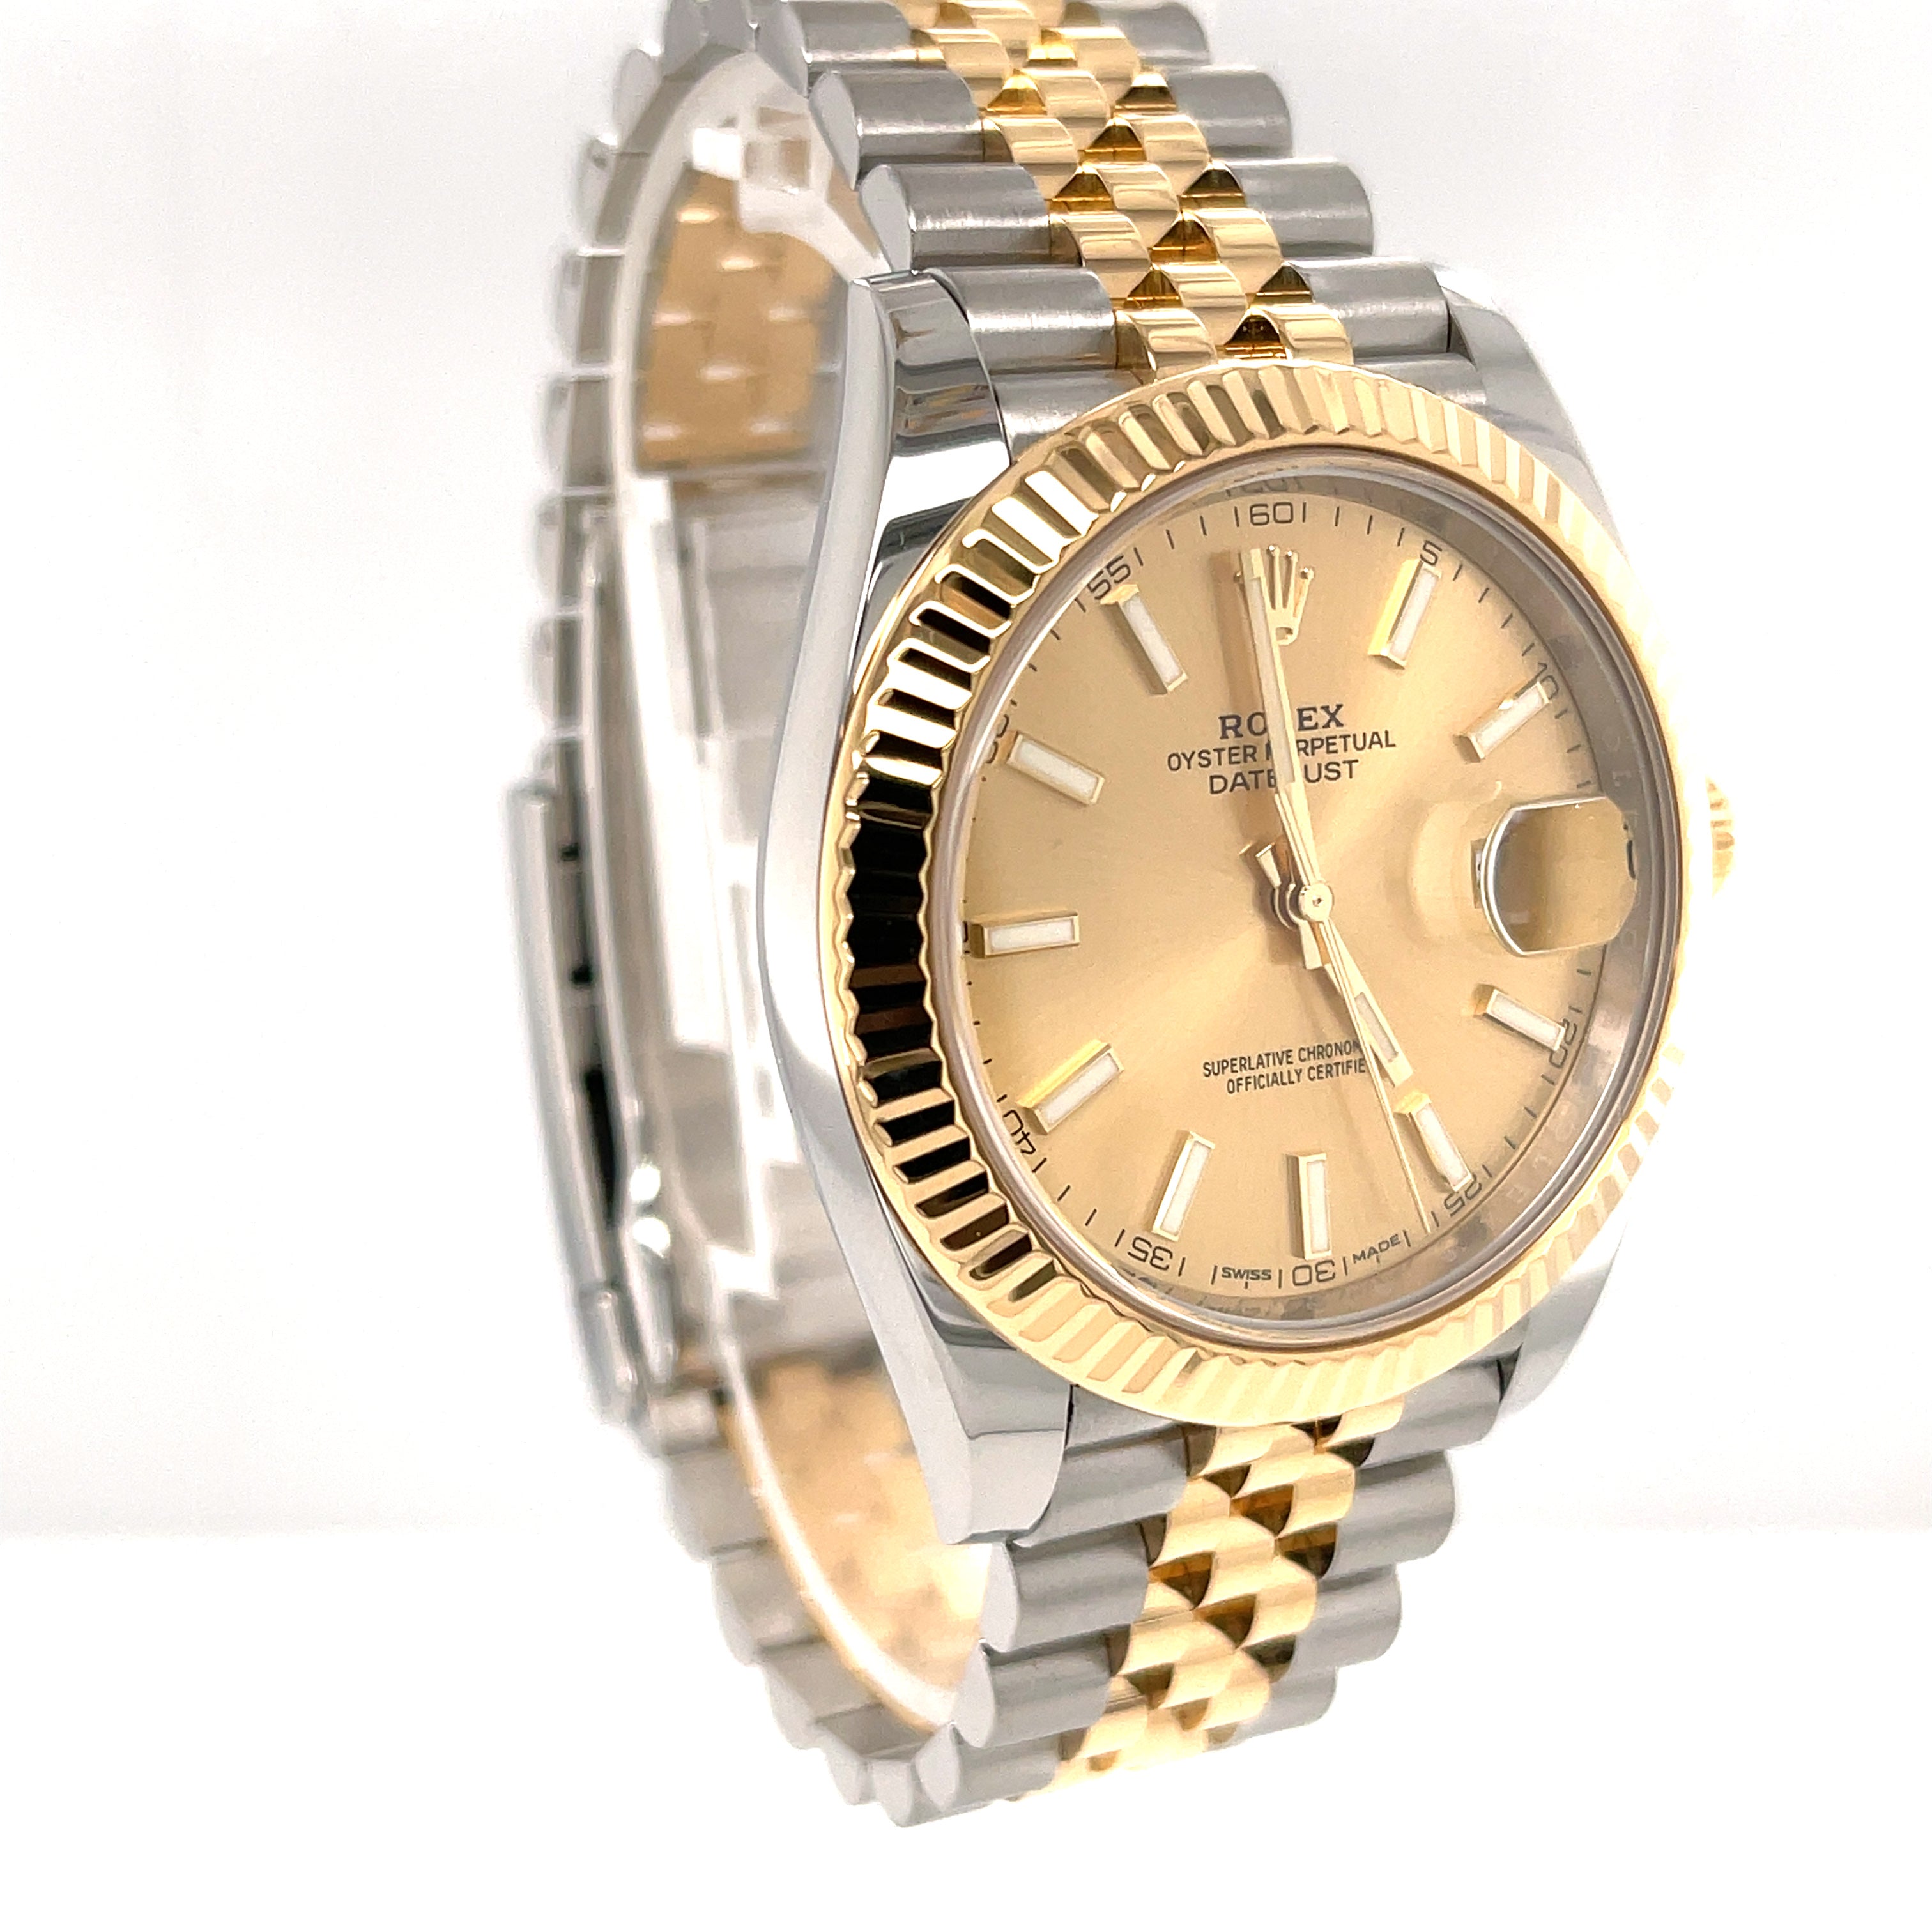 ROLEX Datejust 41 126333 2018 Box & Papers - SOLD